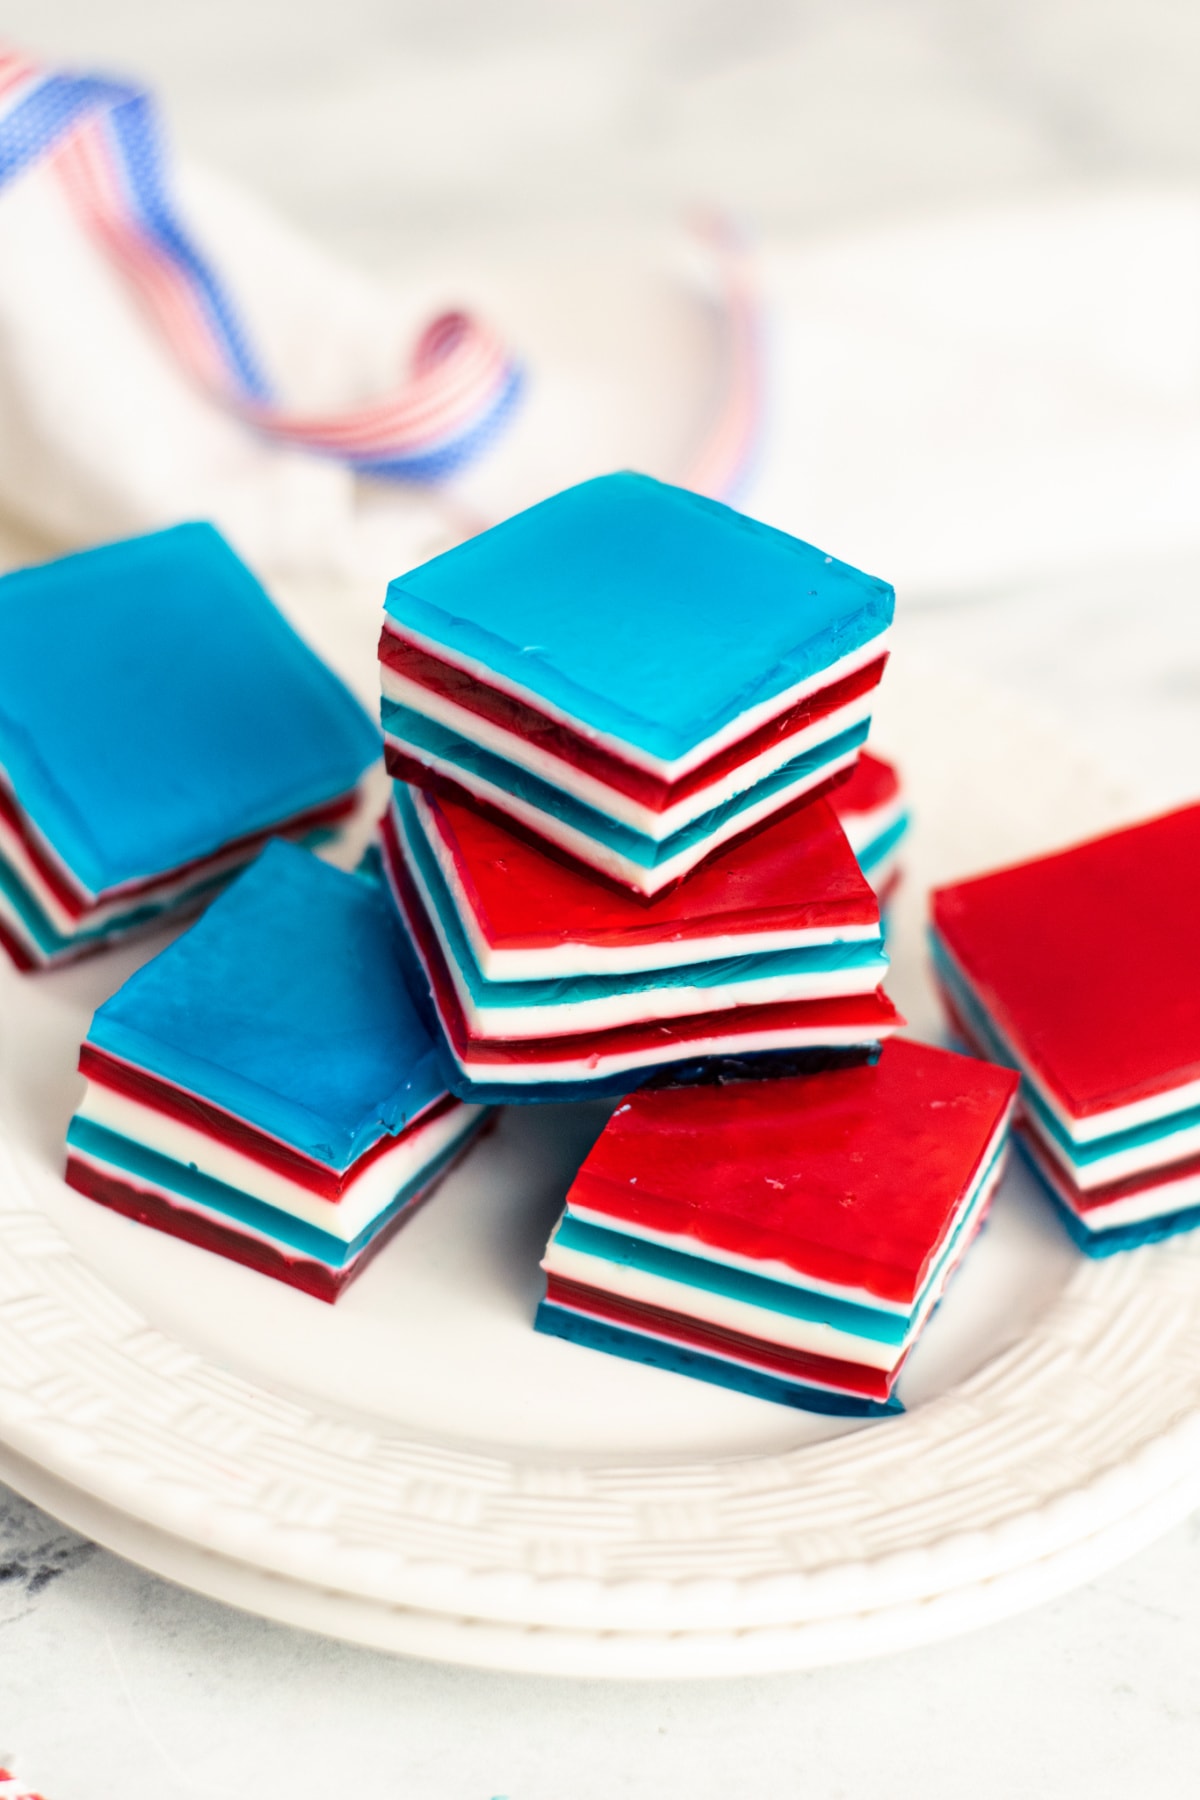 Red, white and blue jello on white plate